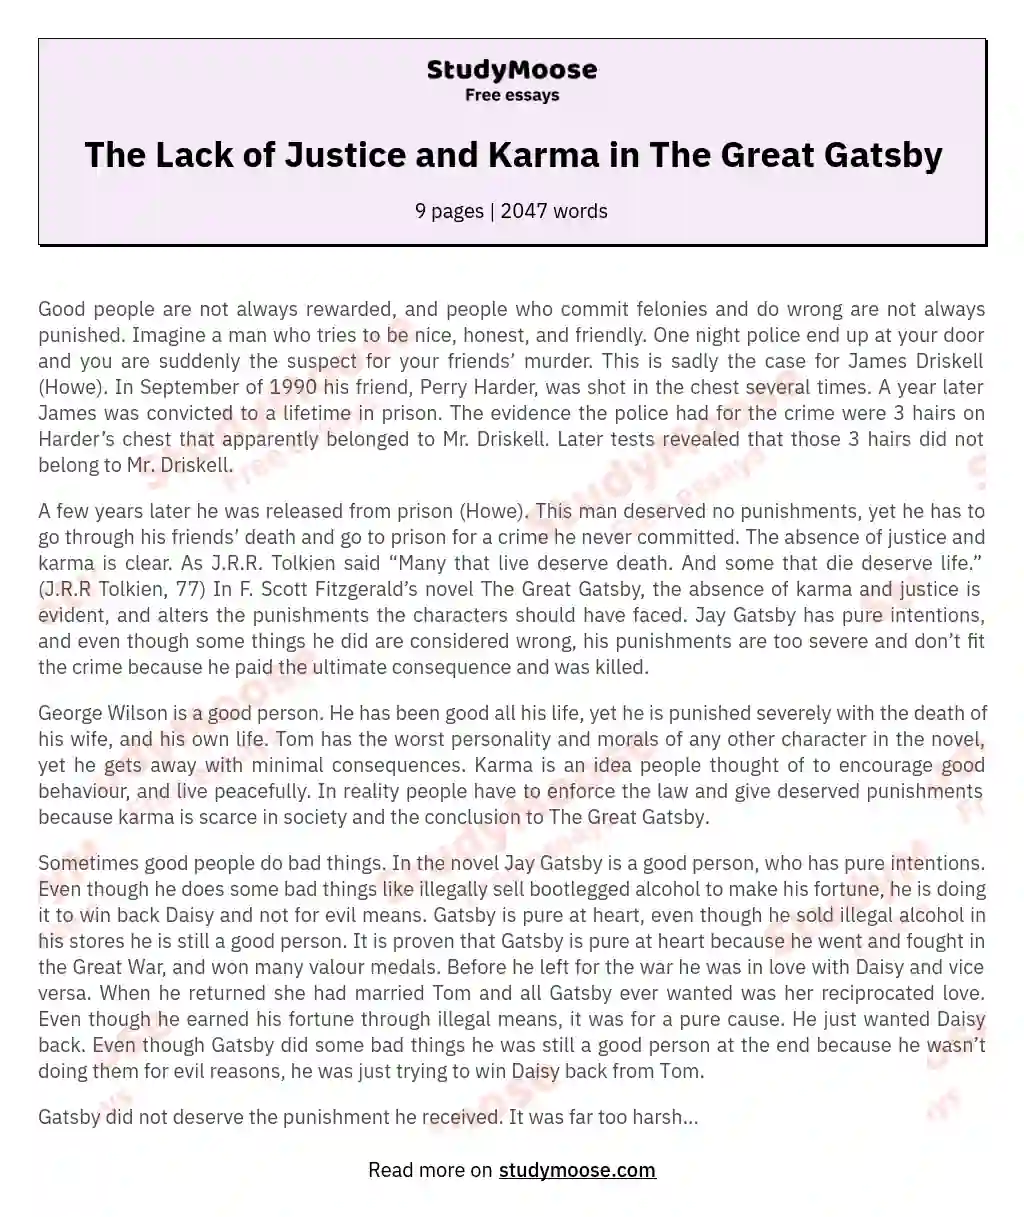 The Lack of Justice and Karma in The Great Gatsby essay